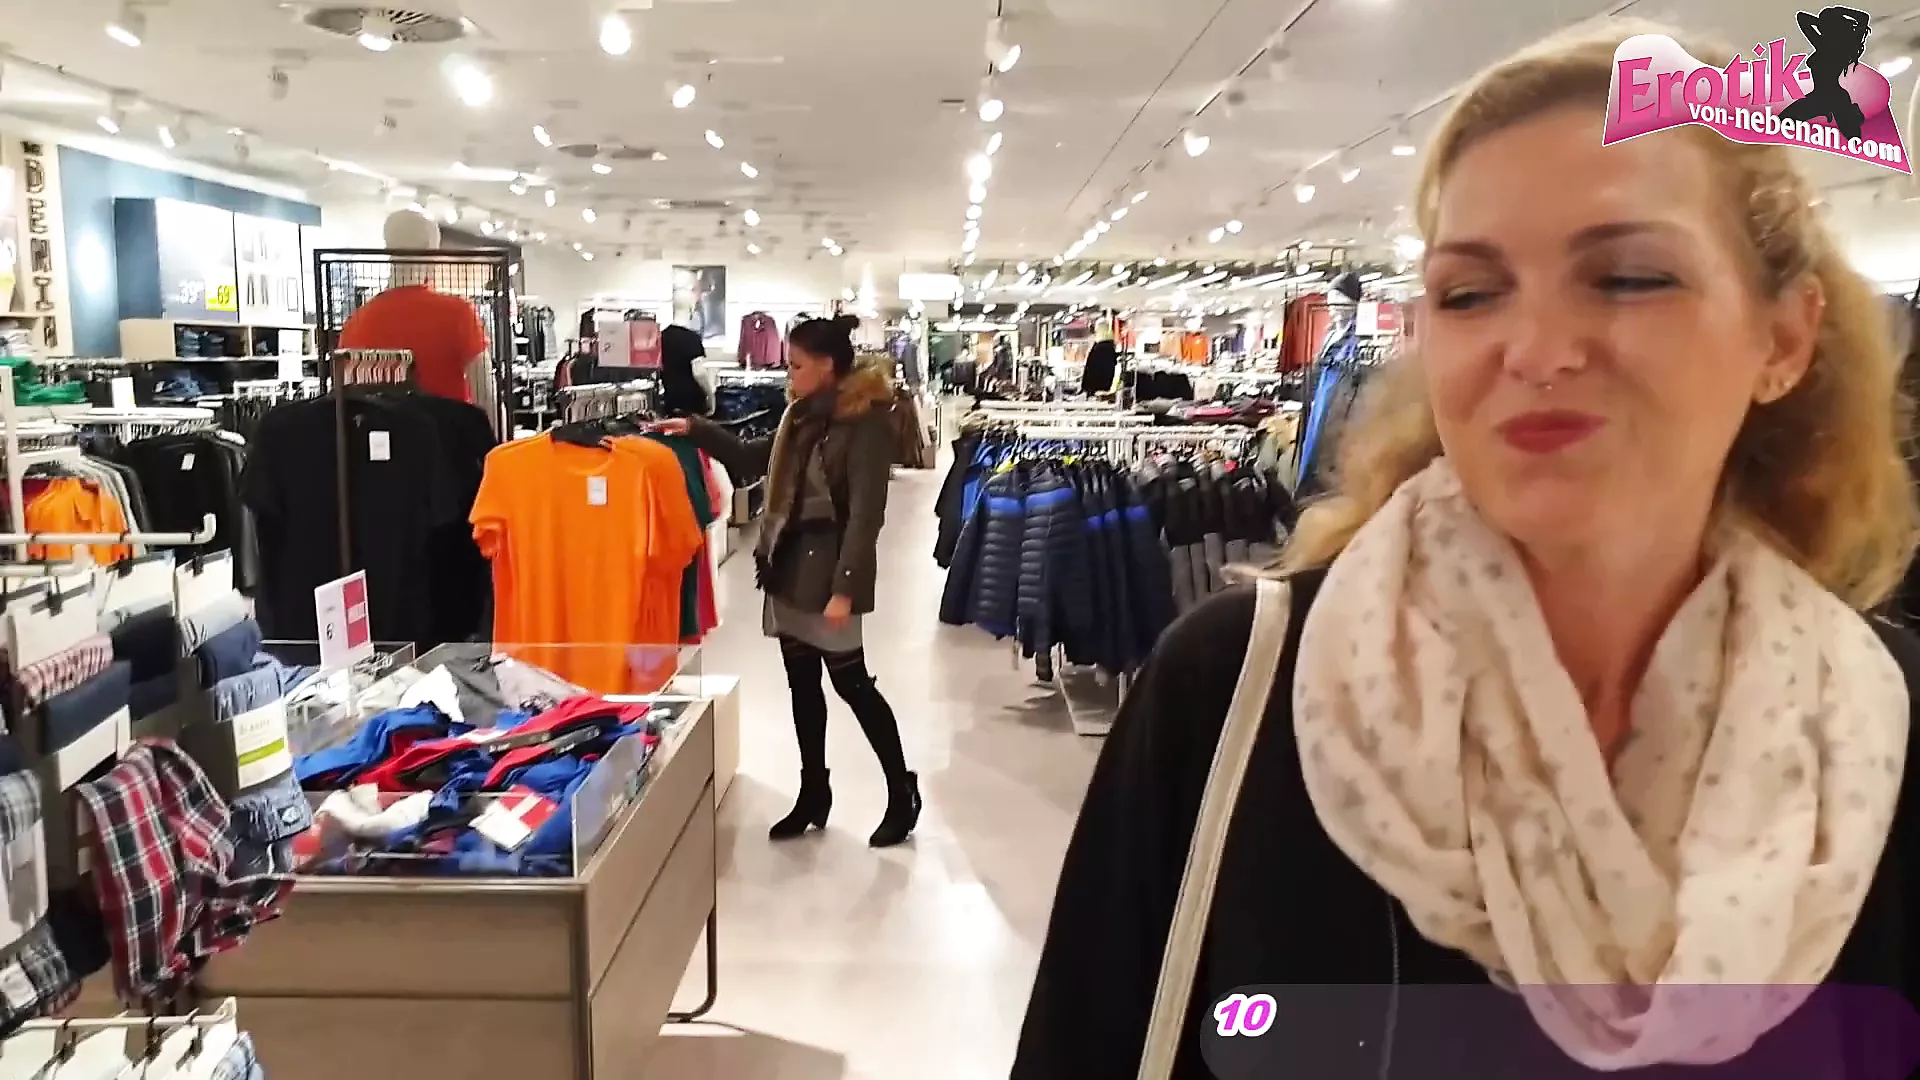 THREESOME CUM WALK IN SHOPPING CENTER AFTER Changing room photo